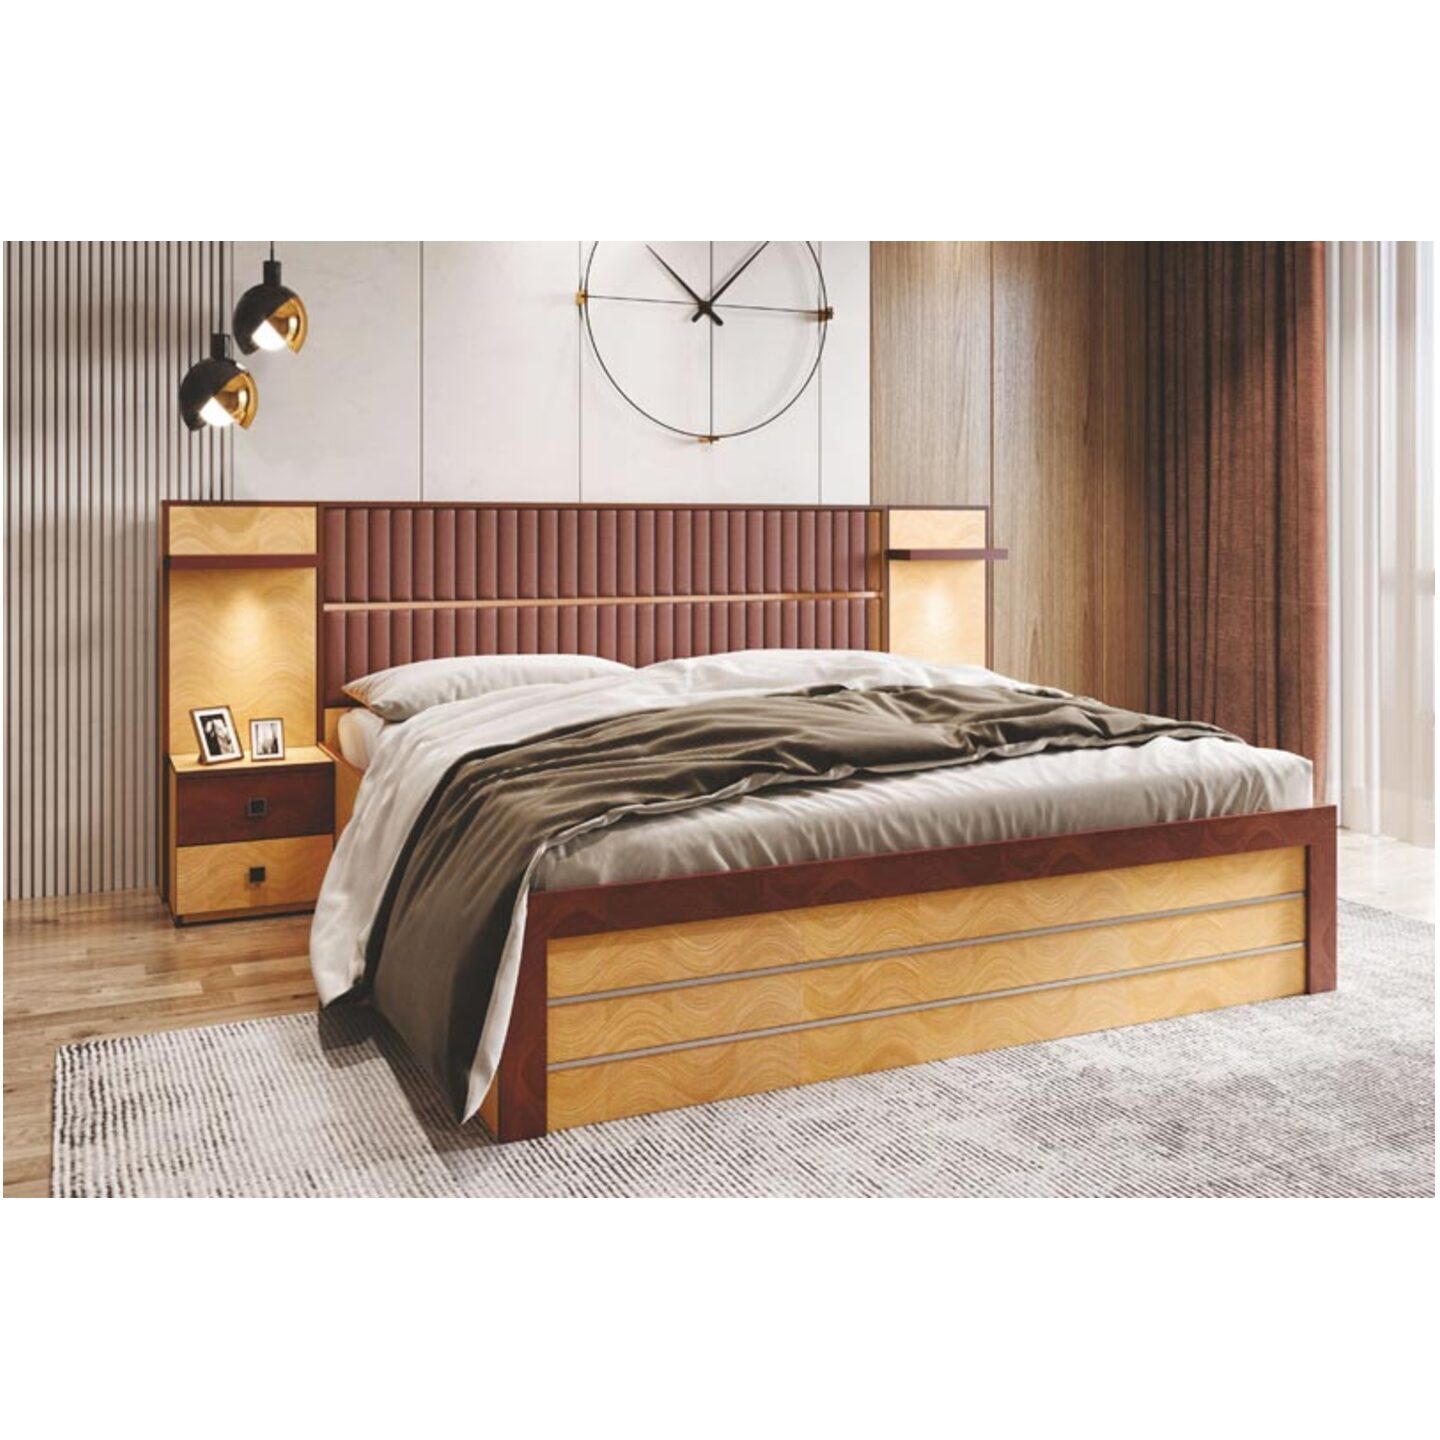 RLF Queen Size Bed 78"x60" Platium In Brown Colour